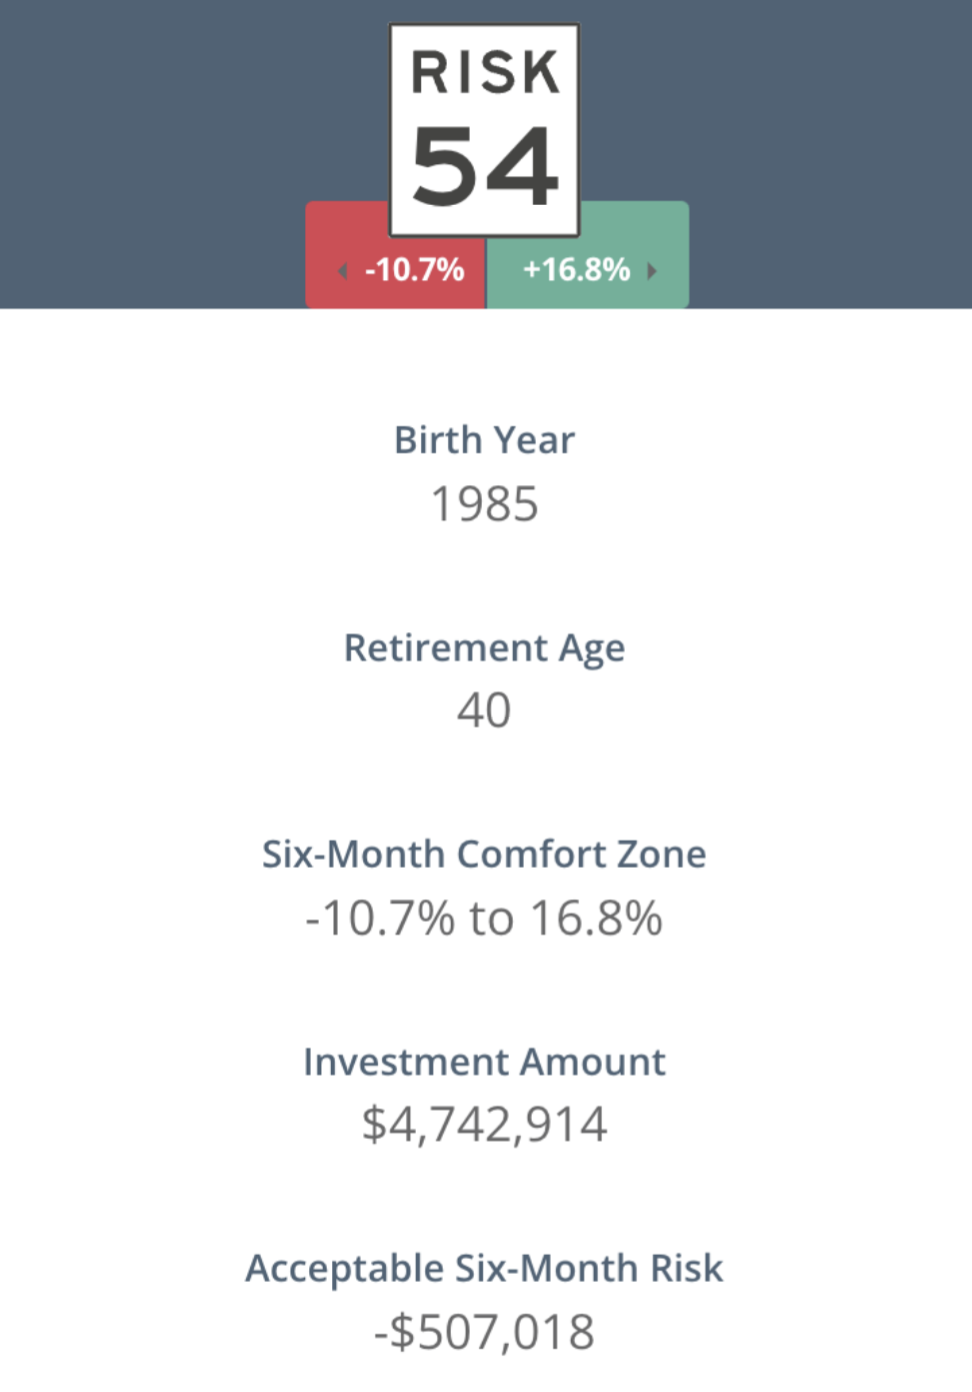 A Risk Number example shows a result of 54 for someone born in 1985 who wants to retire by 40. This person has a six-month comfort zone of -10.7% to 16.8%, an investment amount of $4,742,914, and an acceptable six-month risk of -507,018.